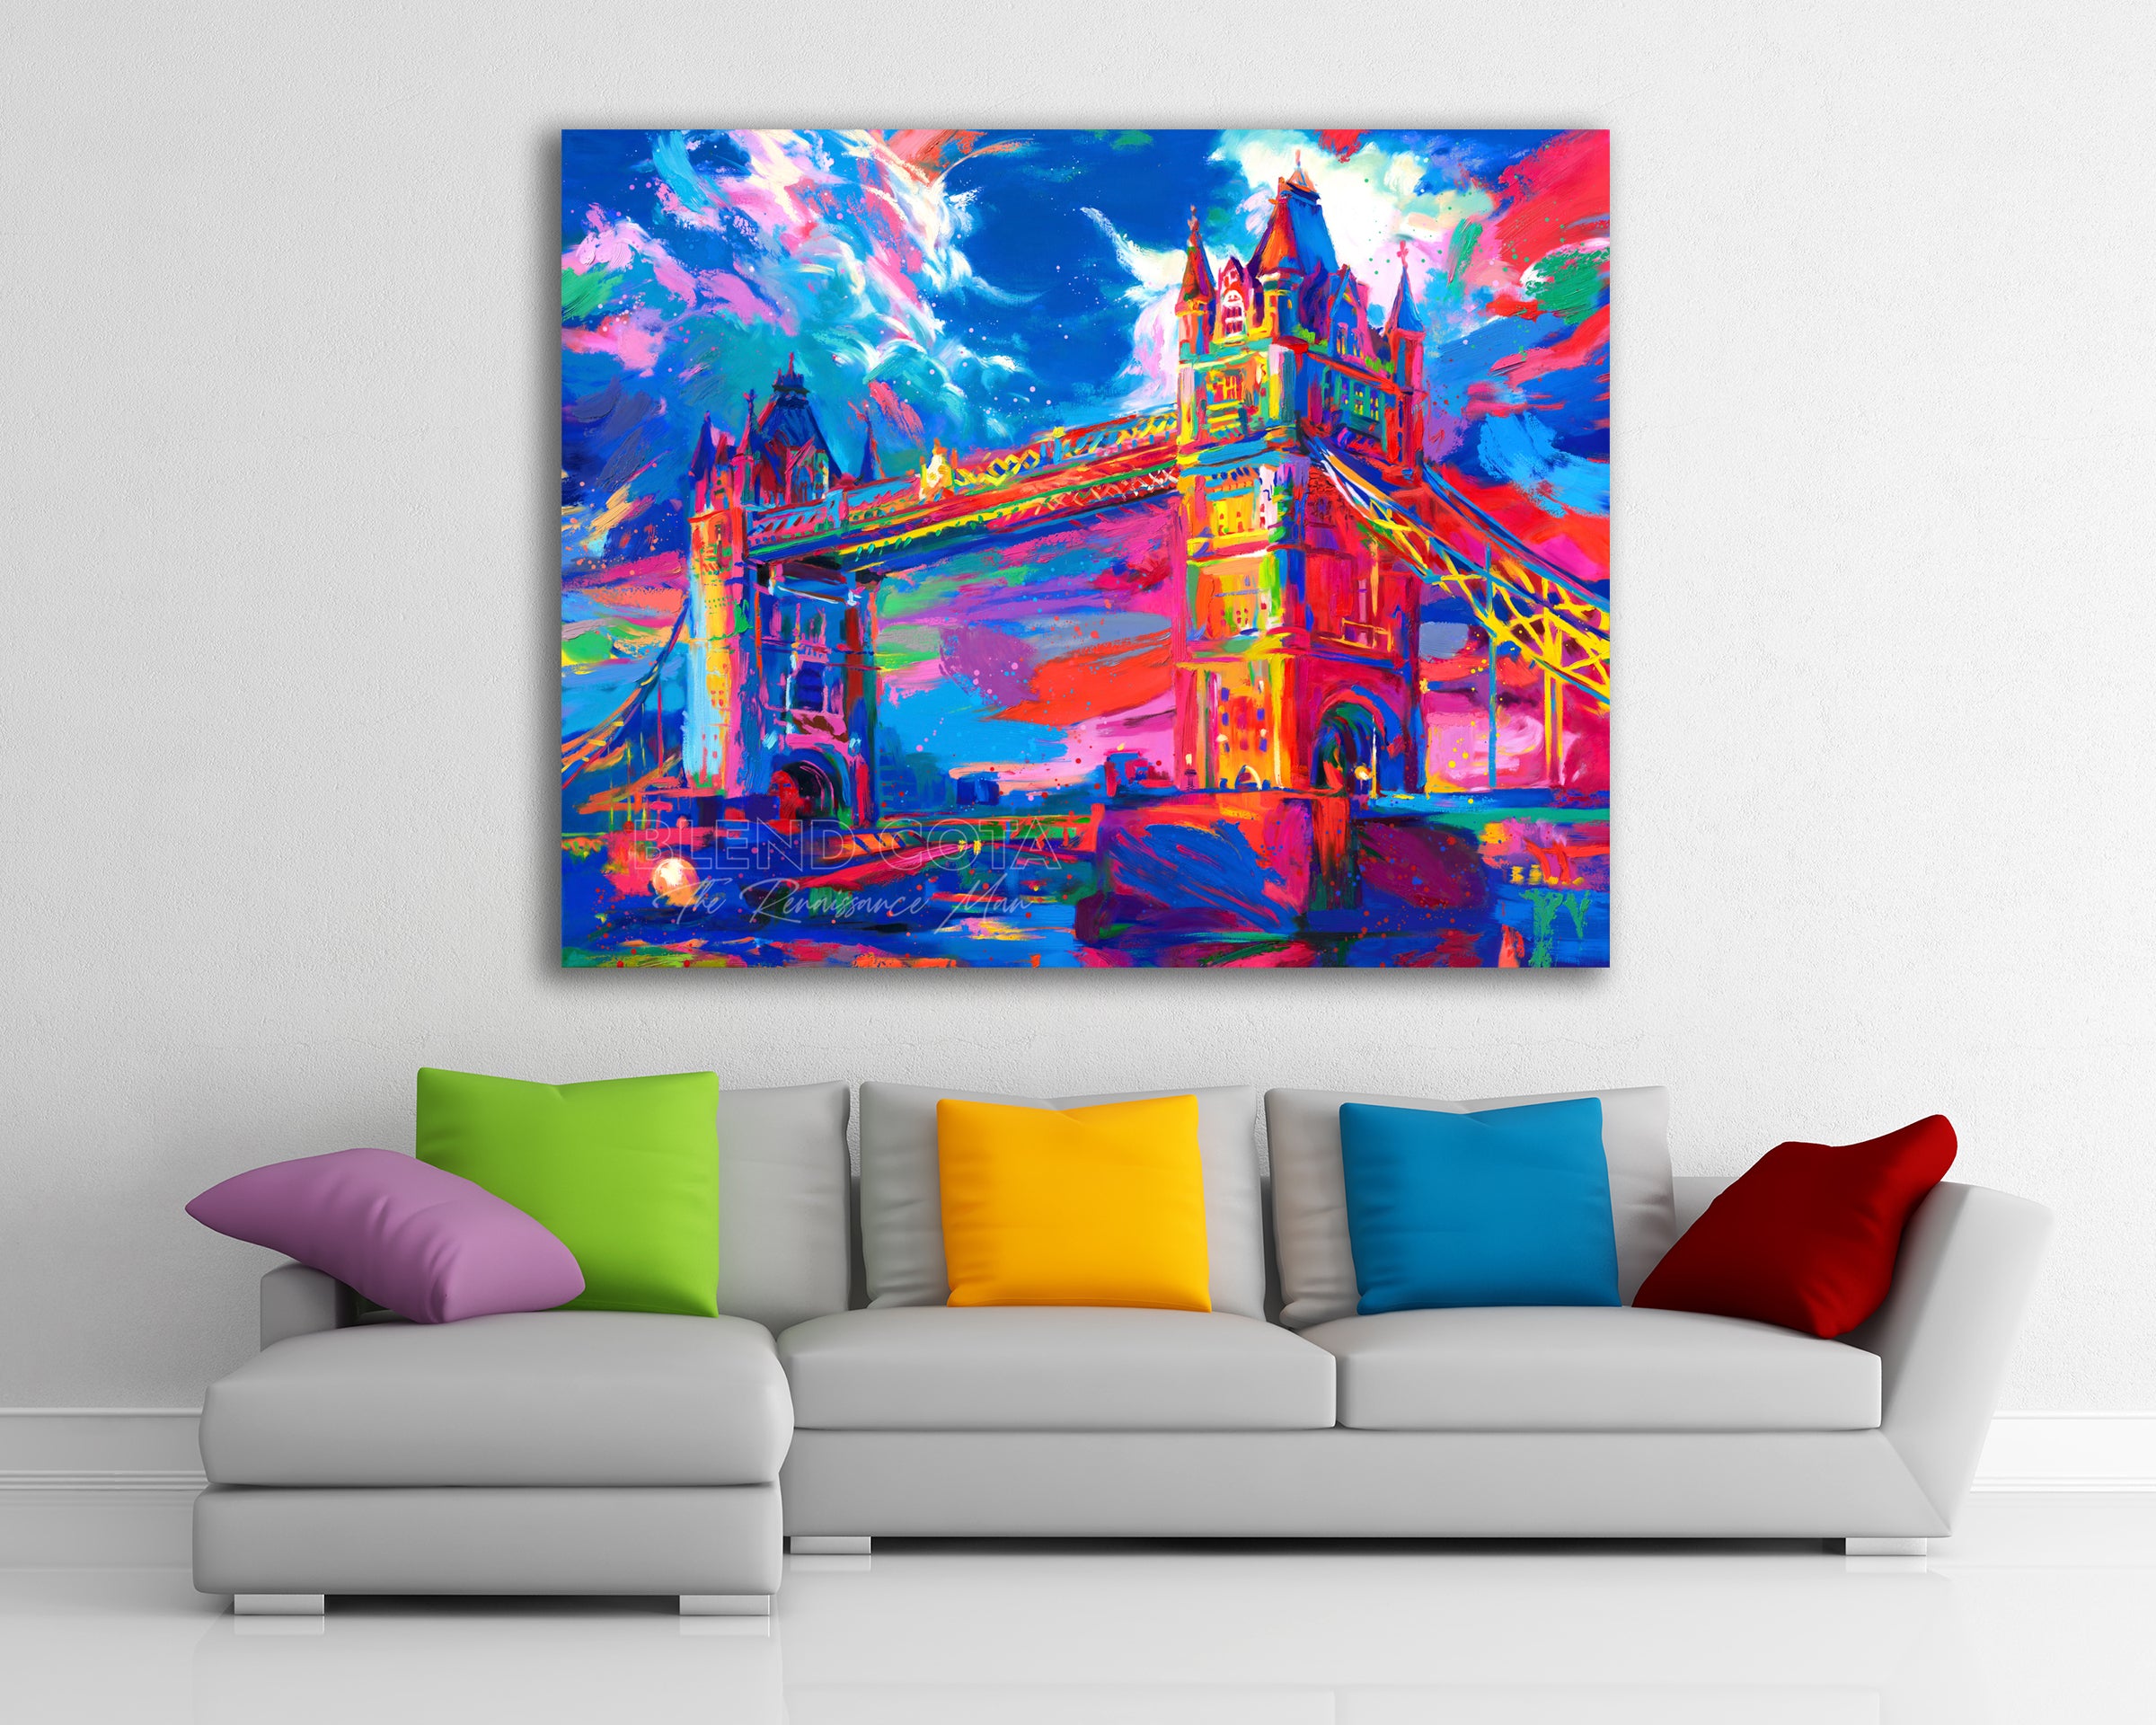 Limited edition painting on canvas of the London Tower Bridge in United Kingdom, seen below from the Thames, displaying masterful engineering and architecture of Victorian Gothic style, and symbol of strength and beauty, in colorful brushstrokes, color expressionism style in a room setting.